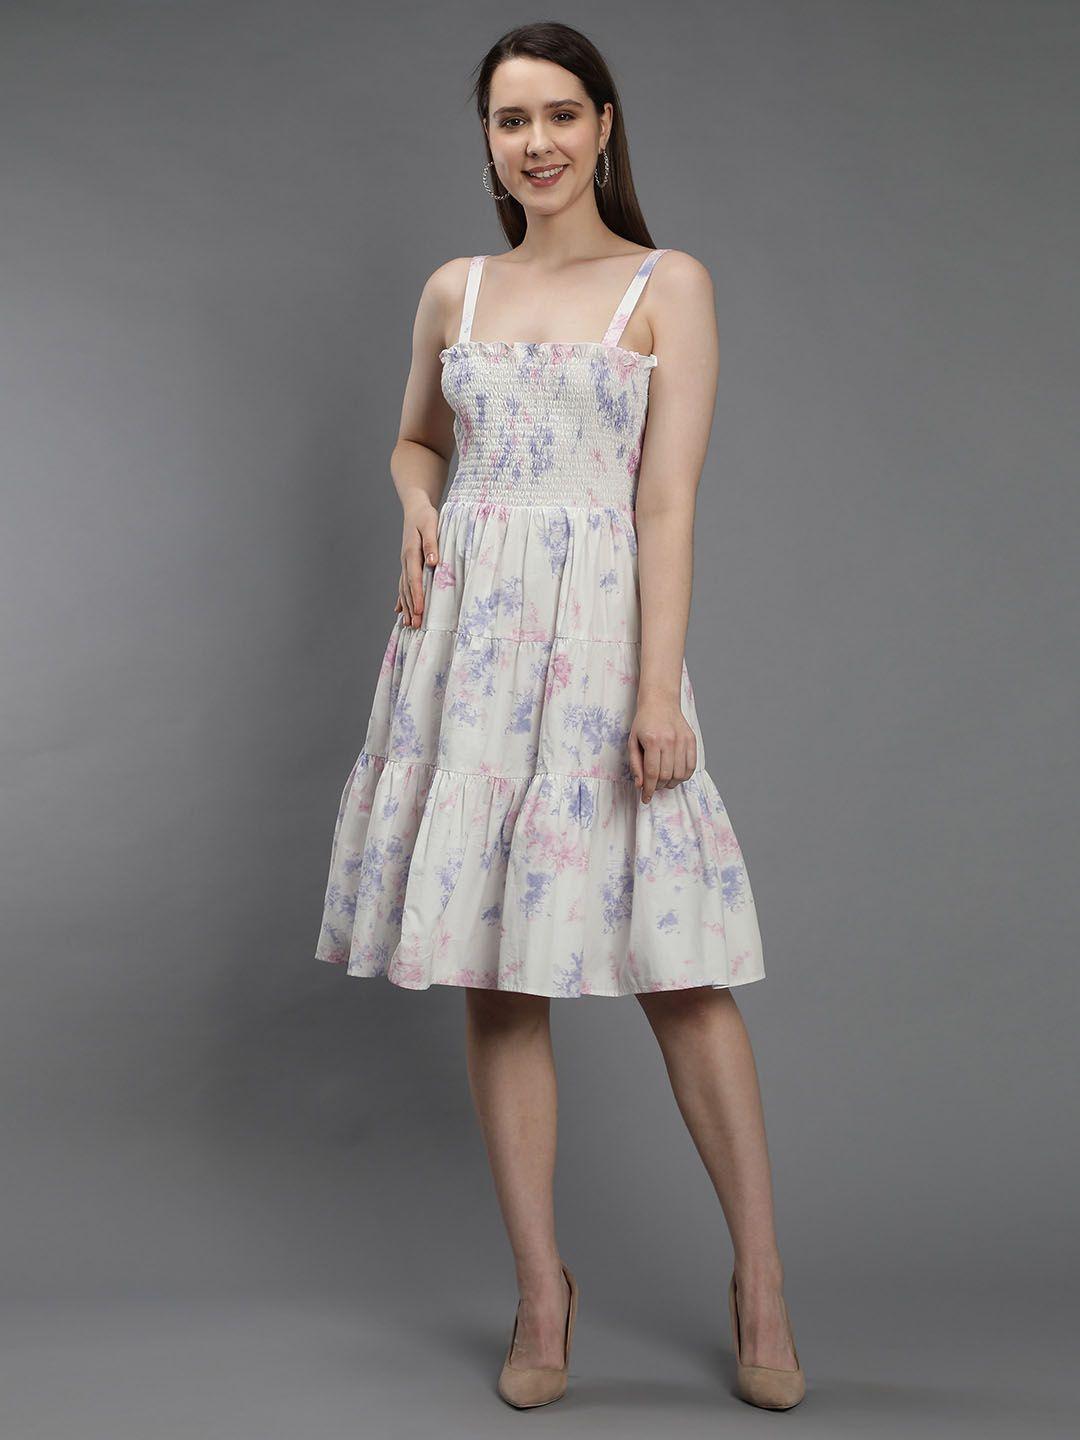 amagyaa floral fit and flare pure cotton dress